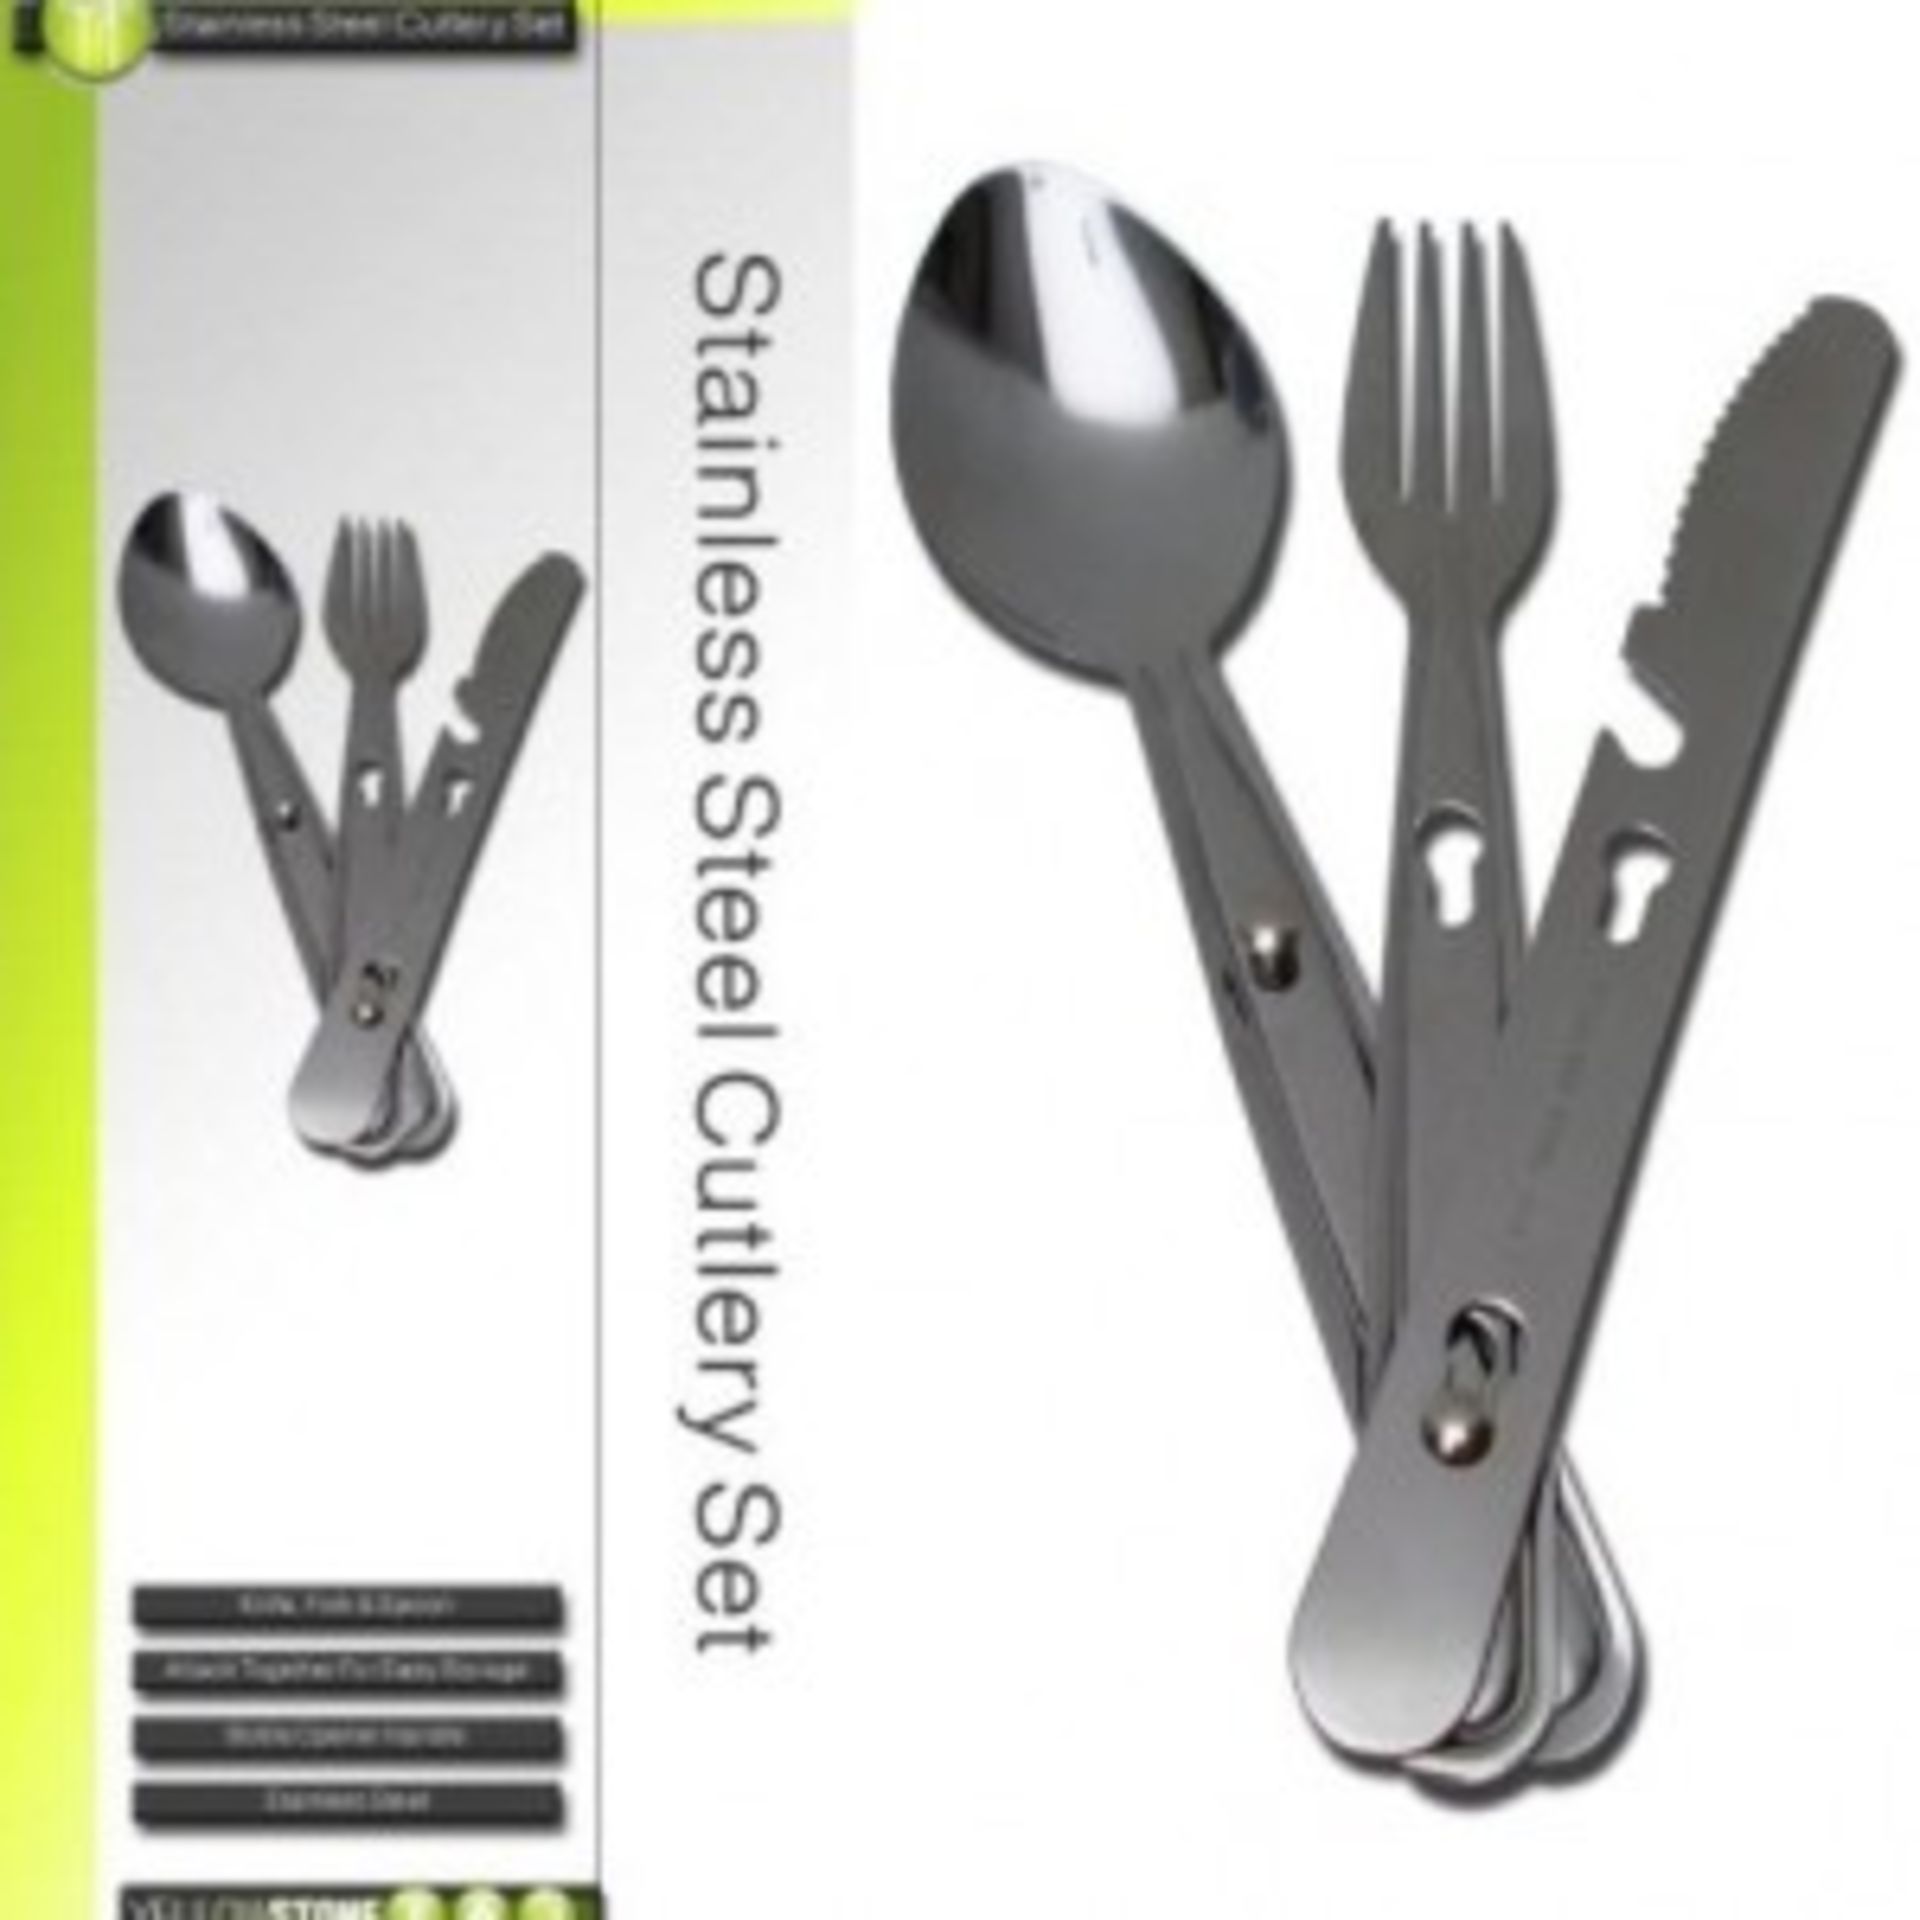 V *TRADE QTY* Brand New Four Stainless Steel Folding Cutlery Sets X 4 YOUR BID PRICE TO BE